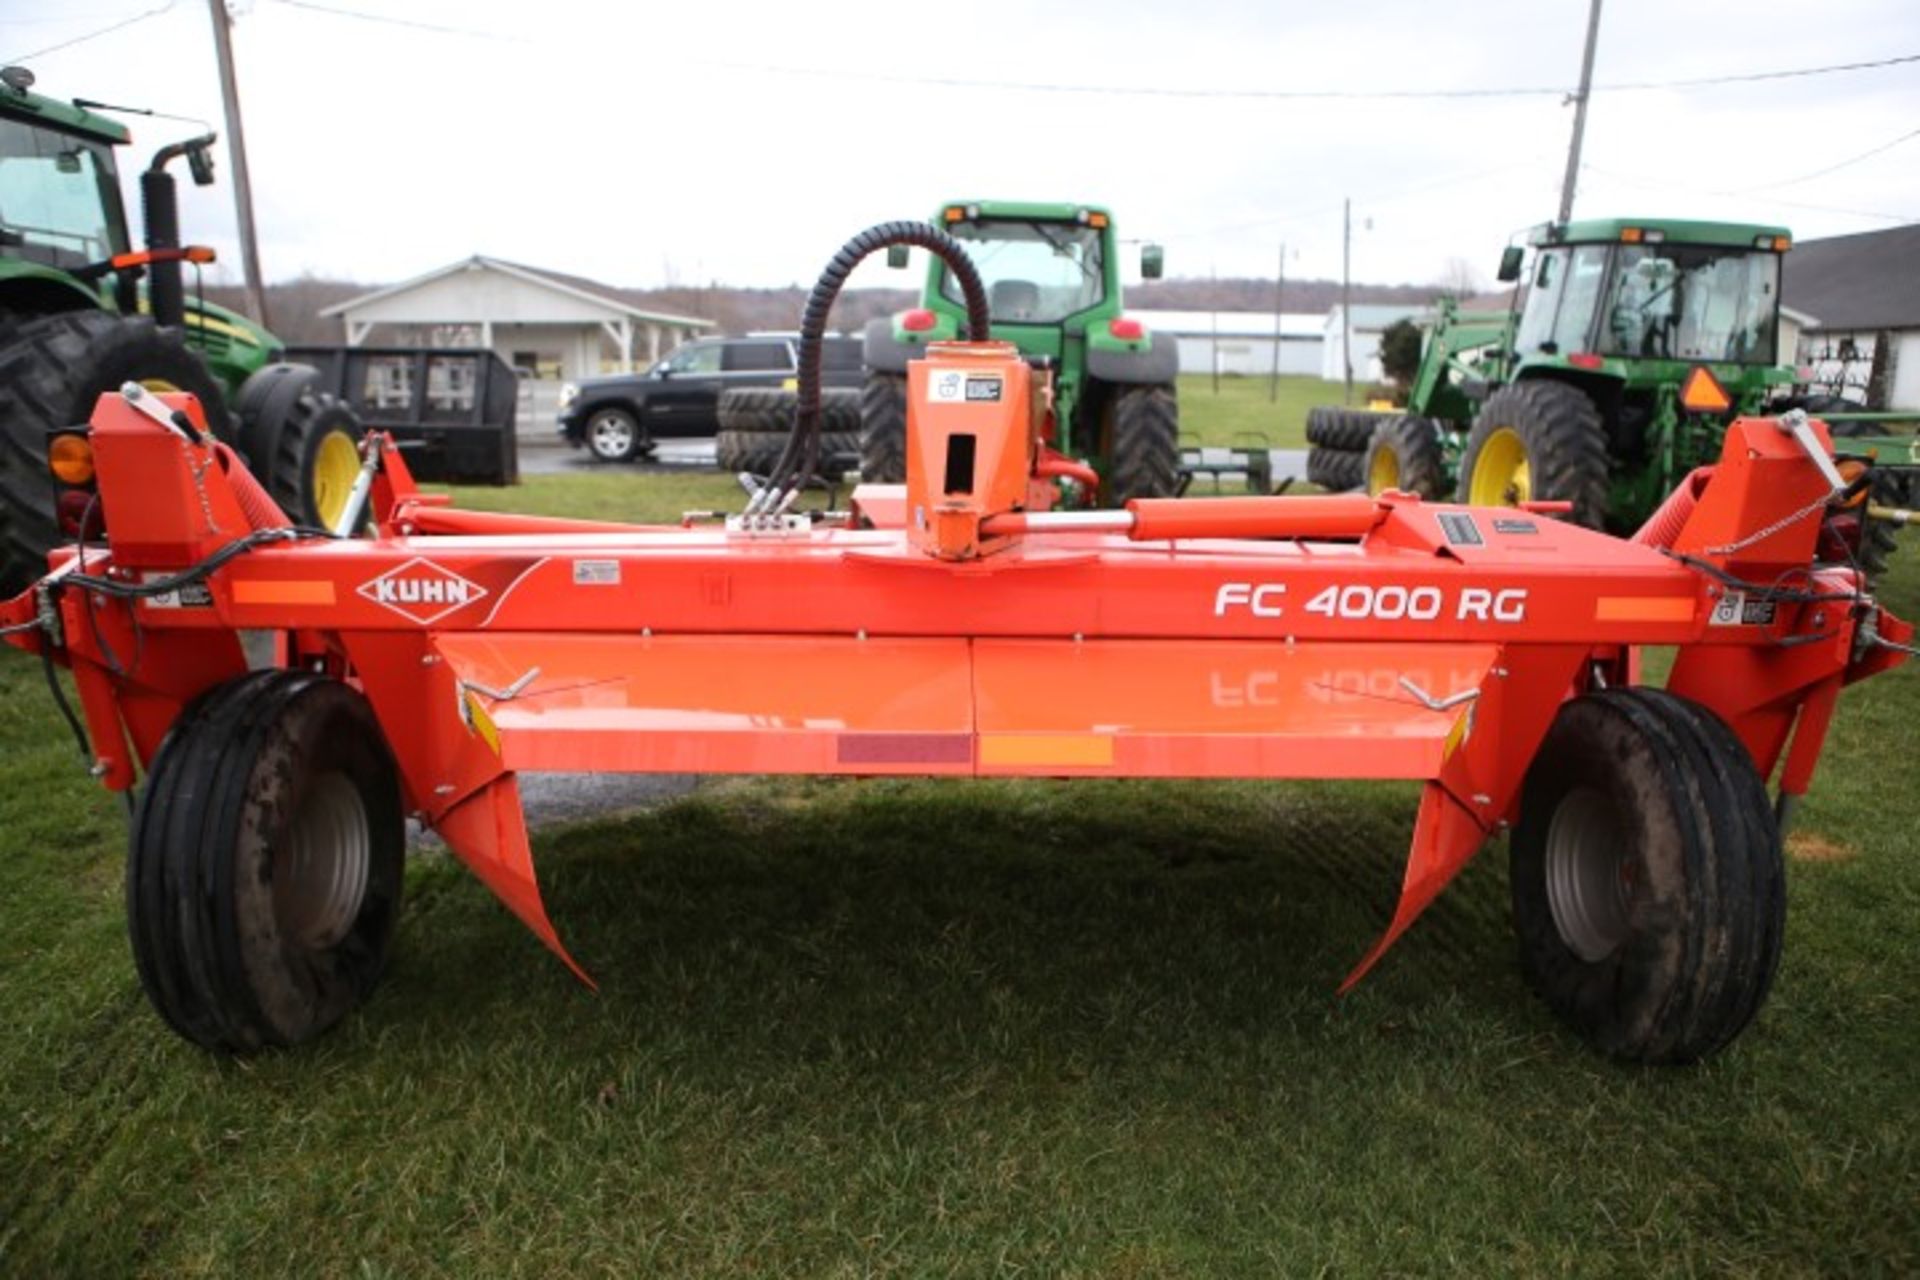 14 KUHN FC4000RG DISCBINE, RUBBER ROLLS, 13', USED 1 YEAR - Image 5 of 5